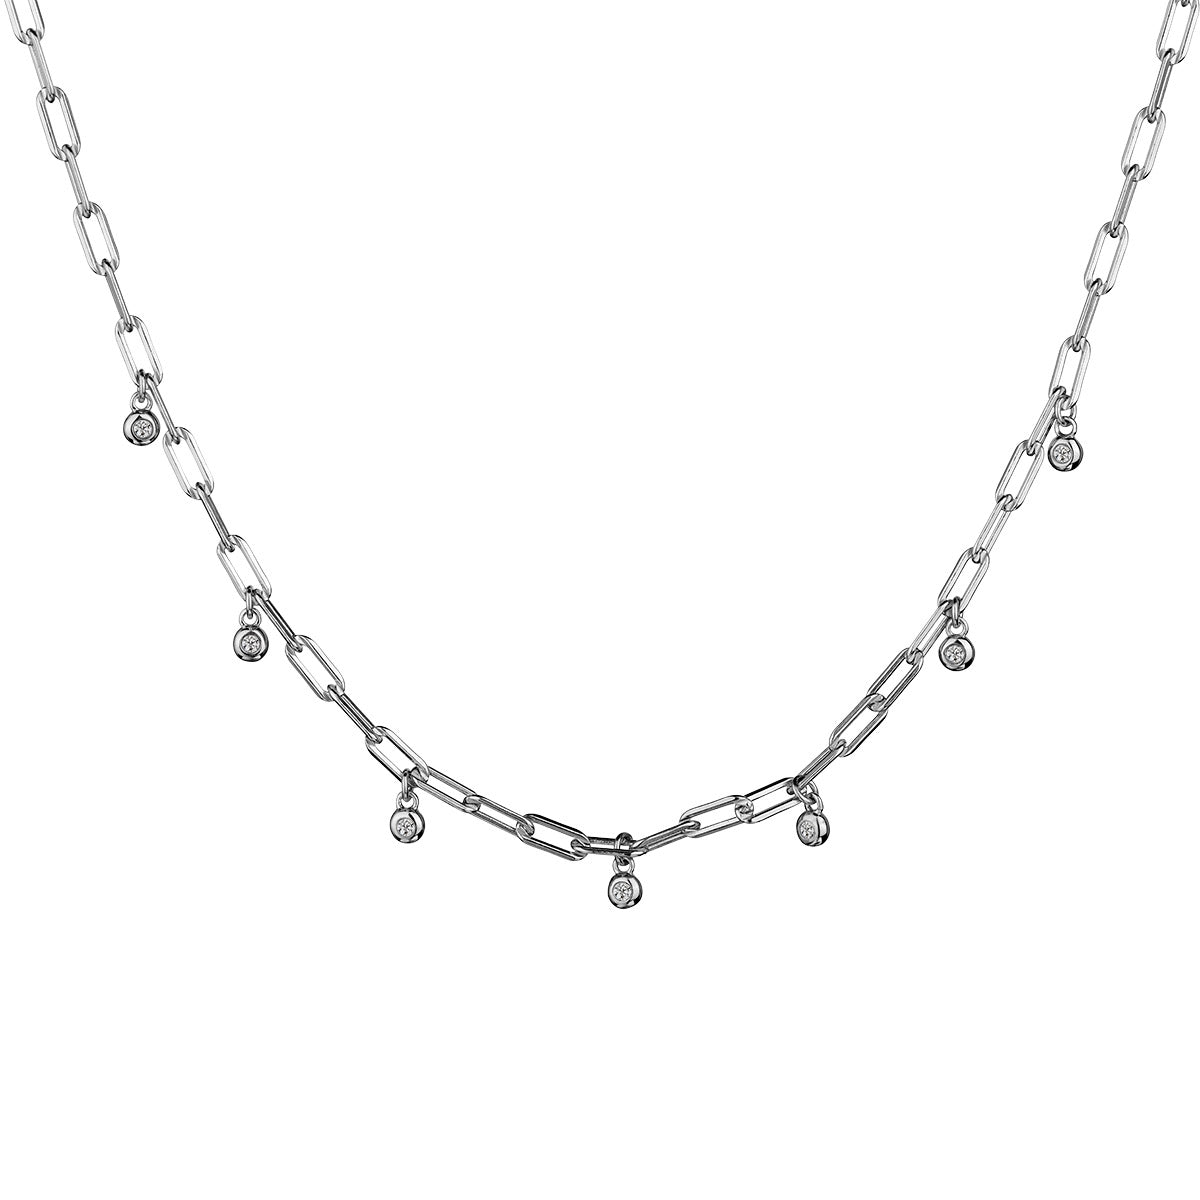 .07 Carat Diamond Necklace, Sterling Silver...................NOW